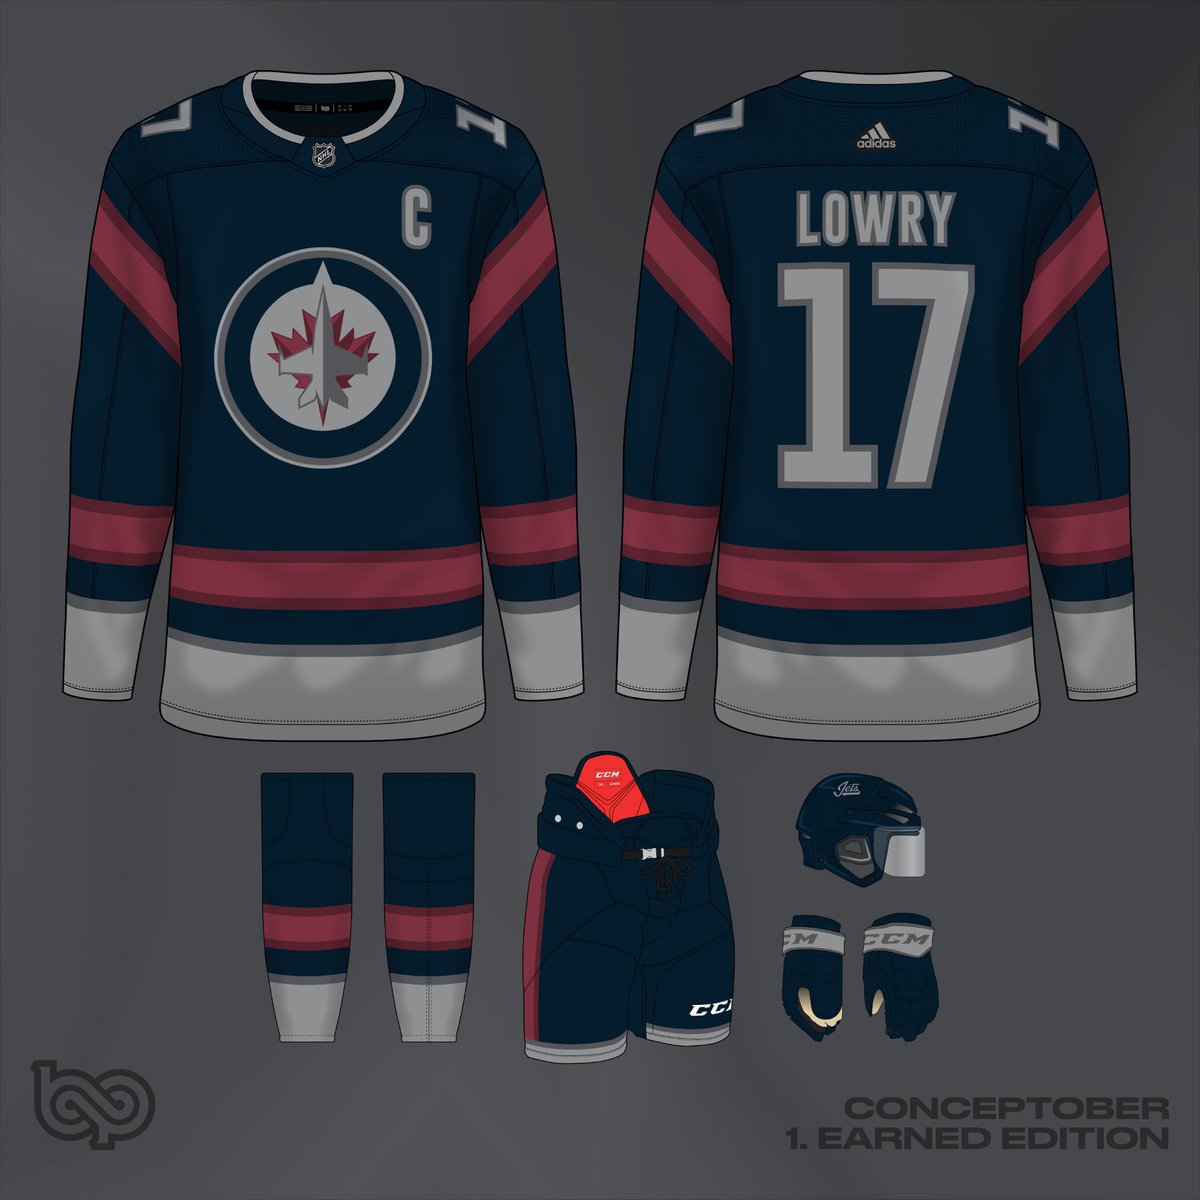 Day 1 of Conceptober: Earned edition #conceptober #conceptober2023 @The_JerseyNerds